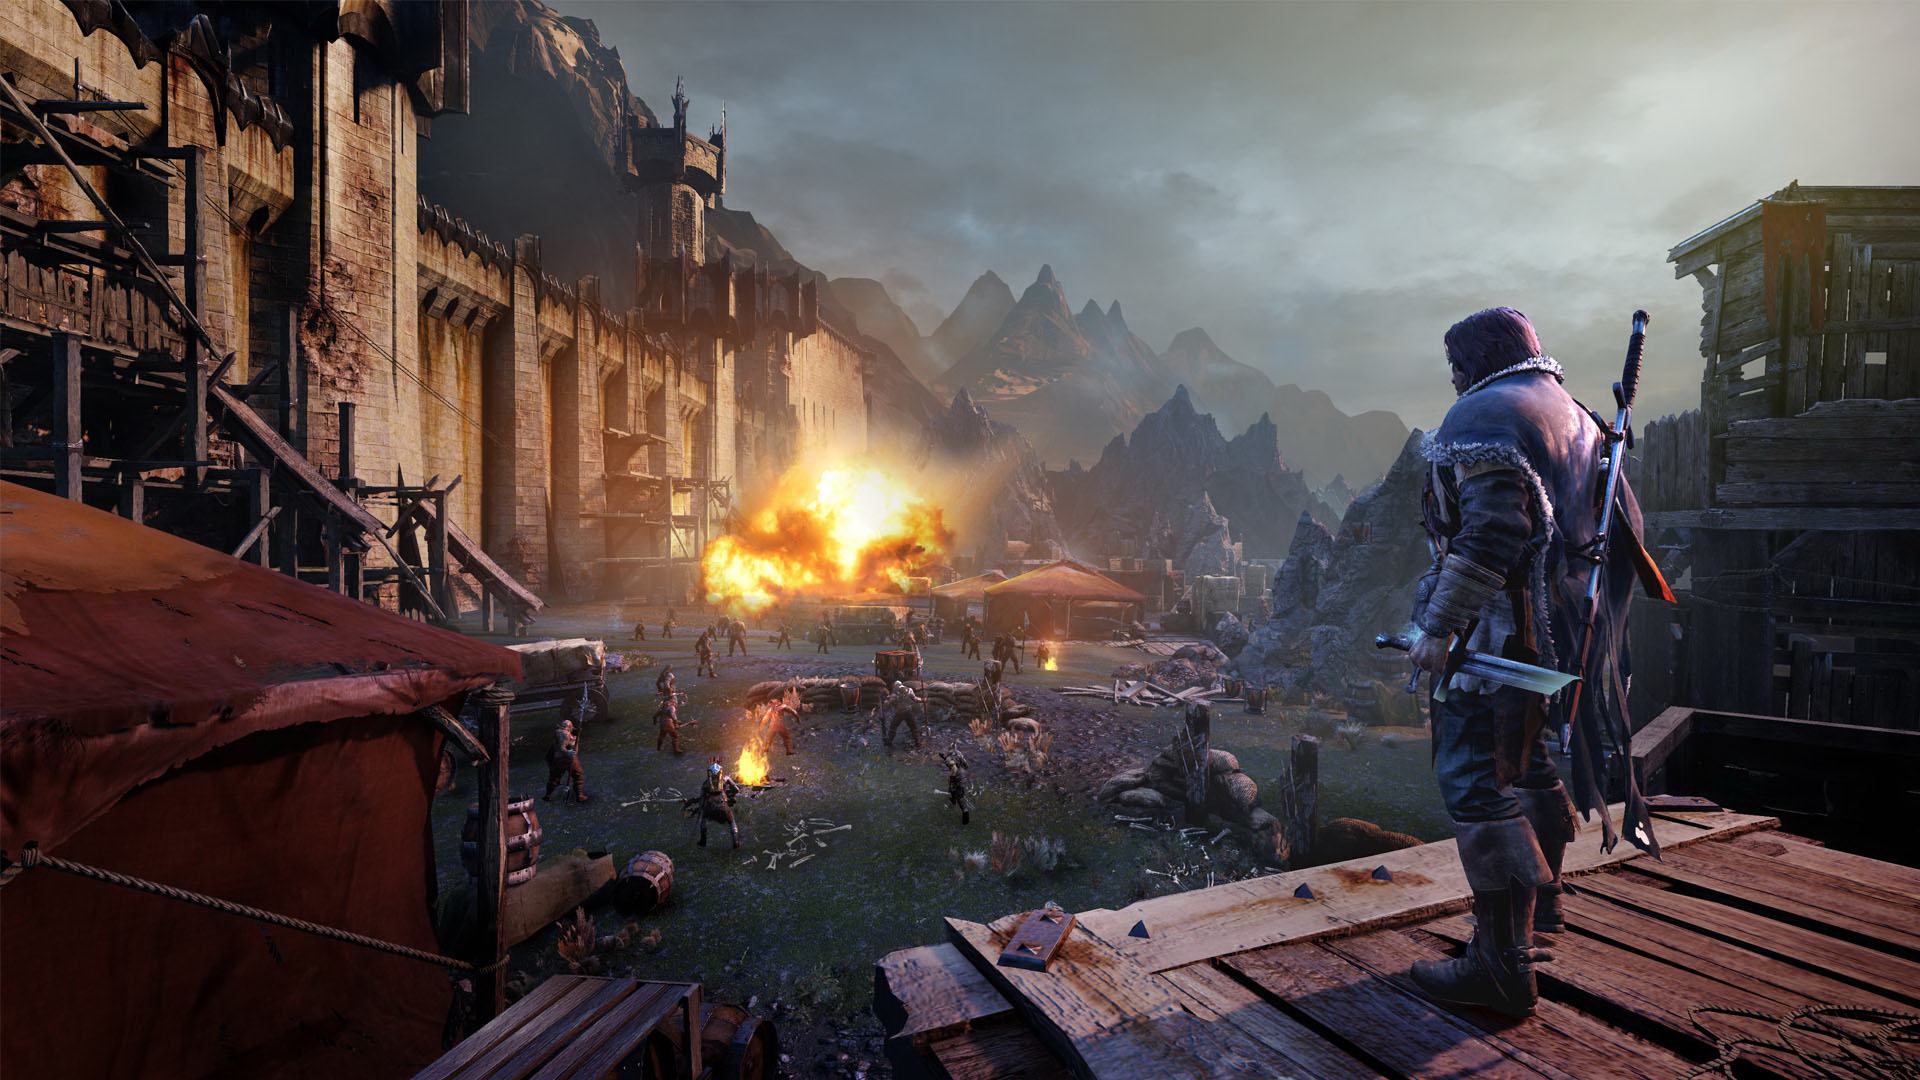 Middle-earth: Shadow of Mordor (Средиземье: Тени Мордора) – GOTY (Game of the Year Edition)